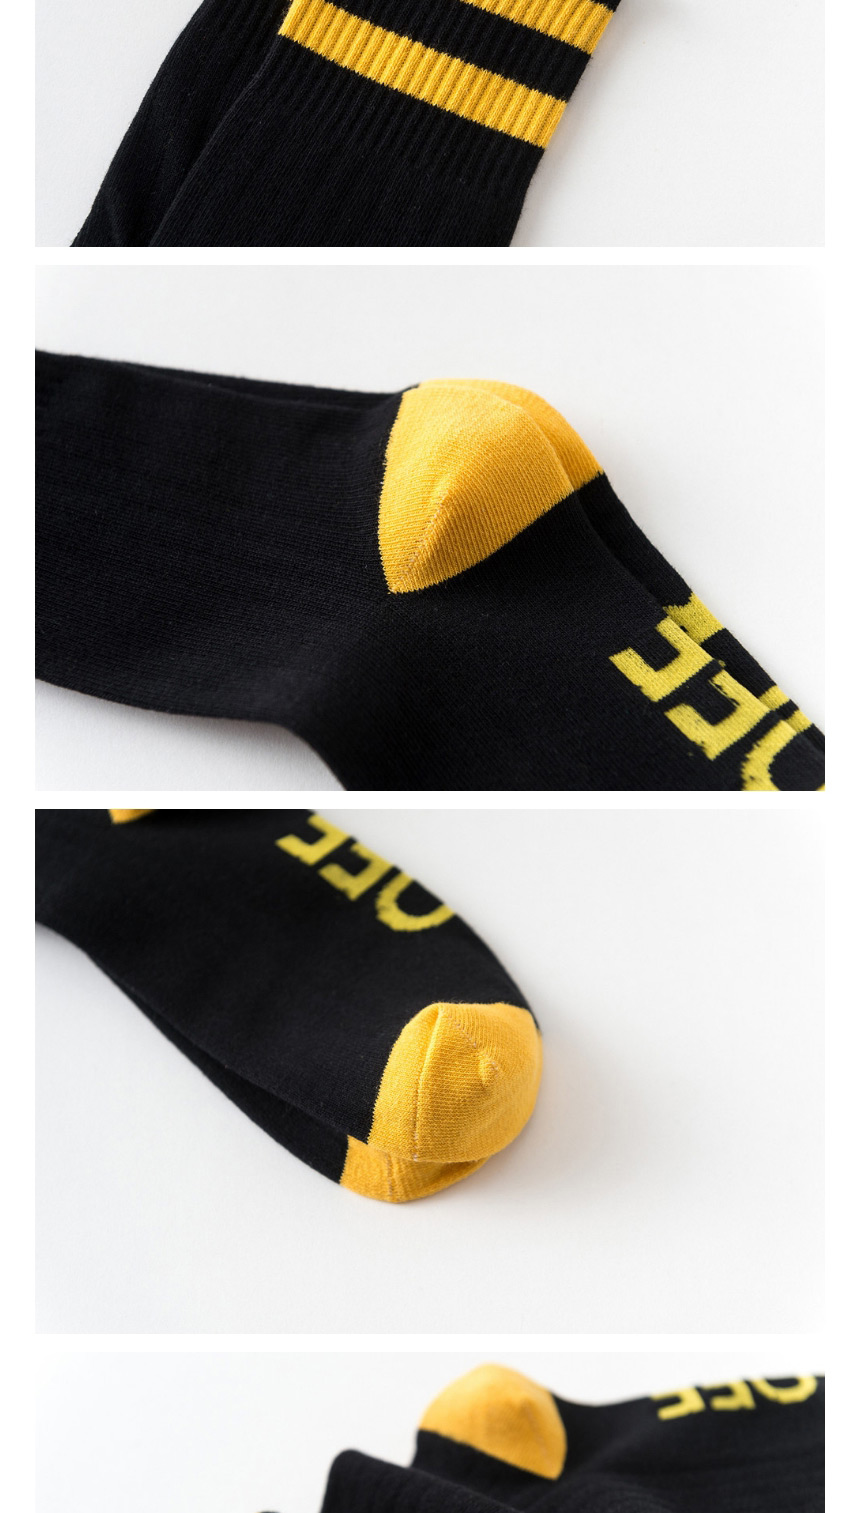 Fashion Black And White Mens Cotton Socks With Contrasting Letters,Fashion Socks